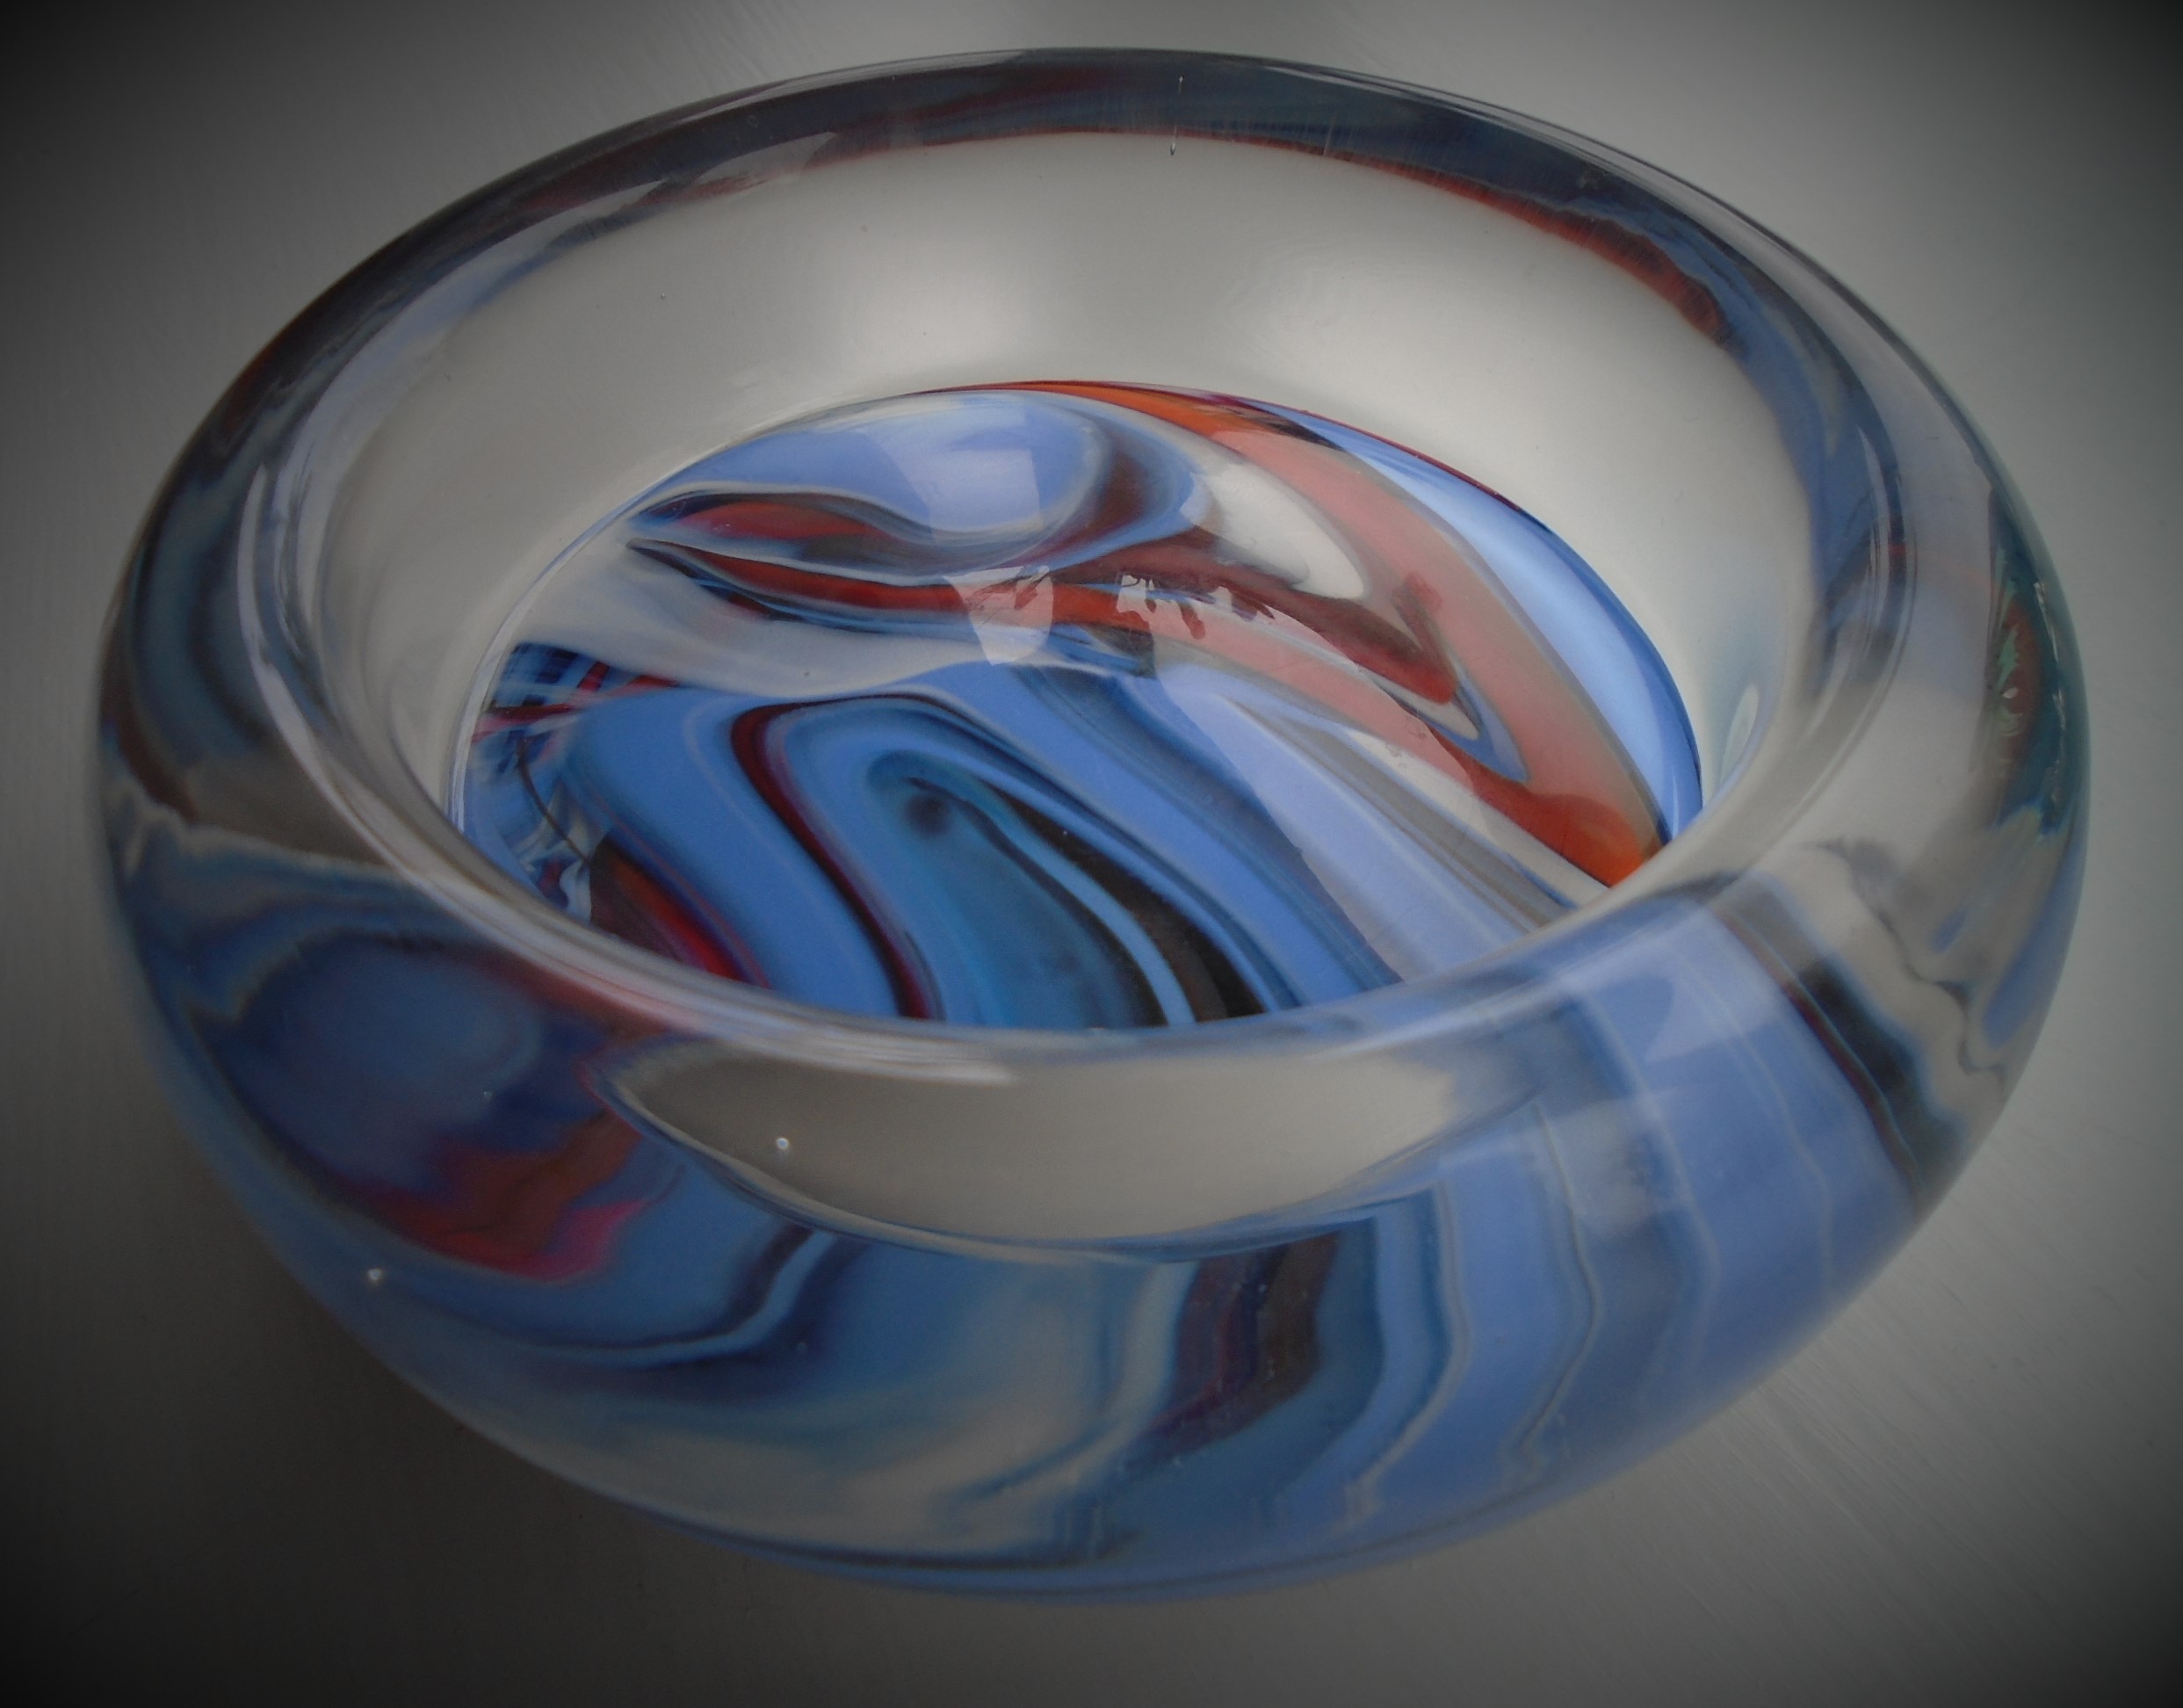 Wedgwood glass swirl bowl which from the base stamp I believe to have been produced in the 70s.